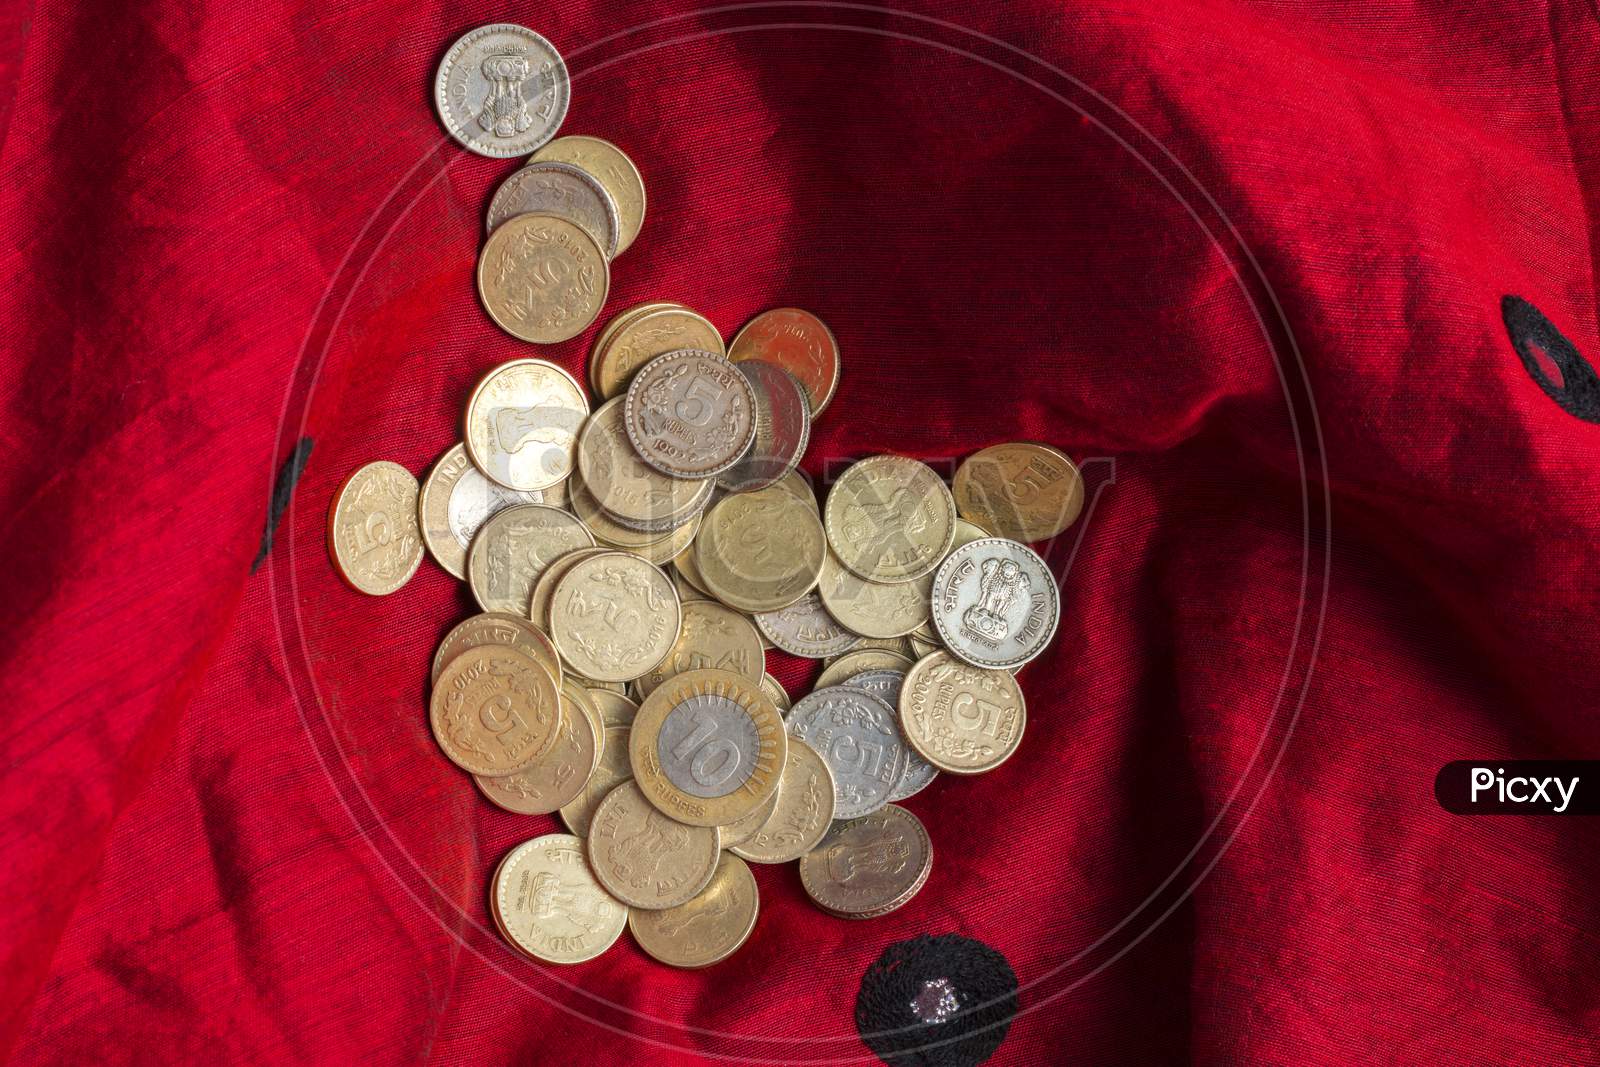 Indian five and ten rupee coins are kept in a red cloth